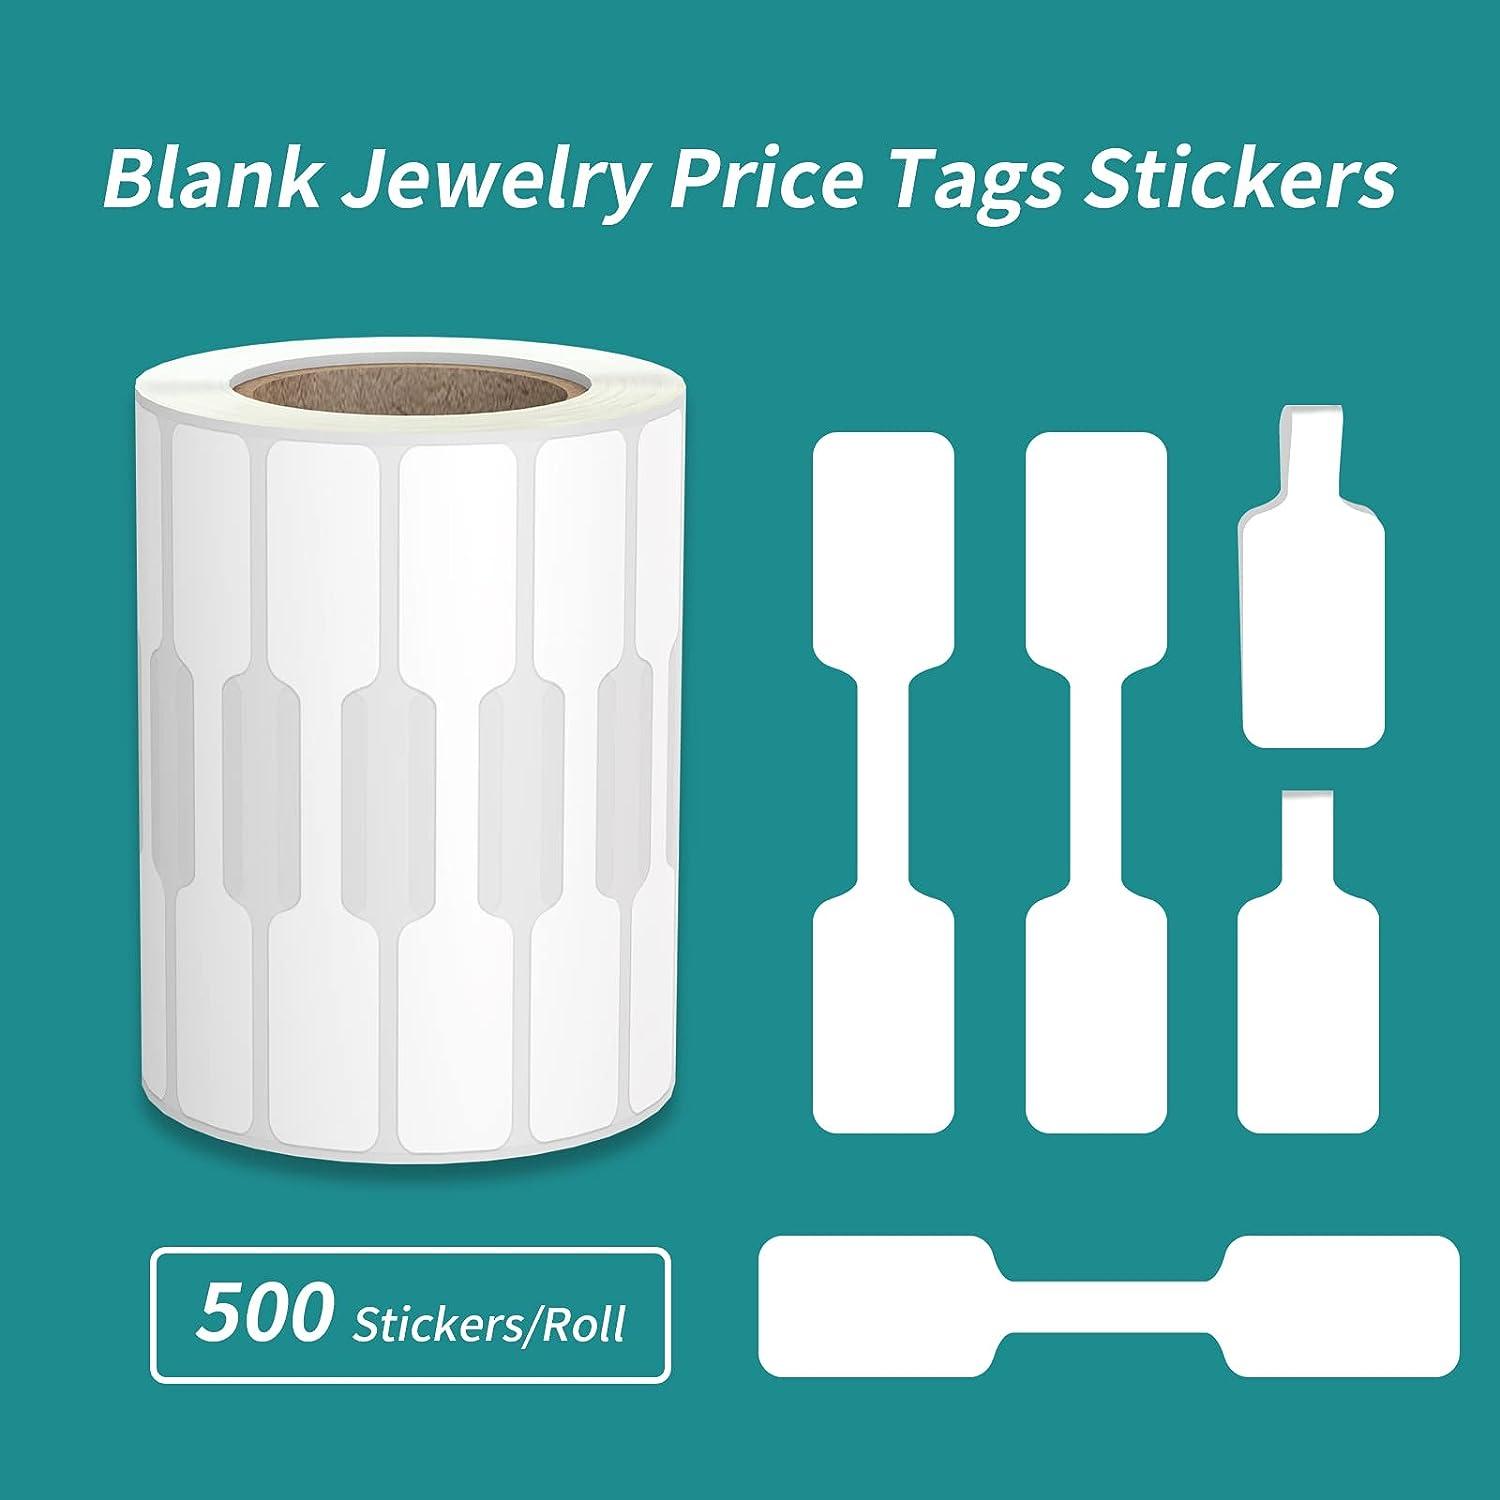 Custom Price Labels and Price Tag Stickers